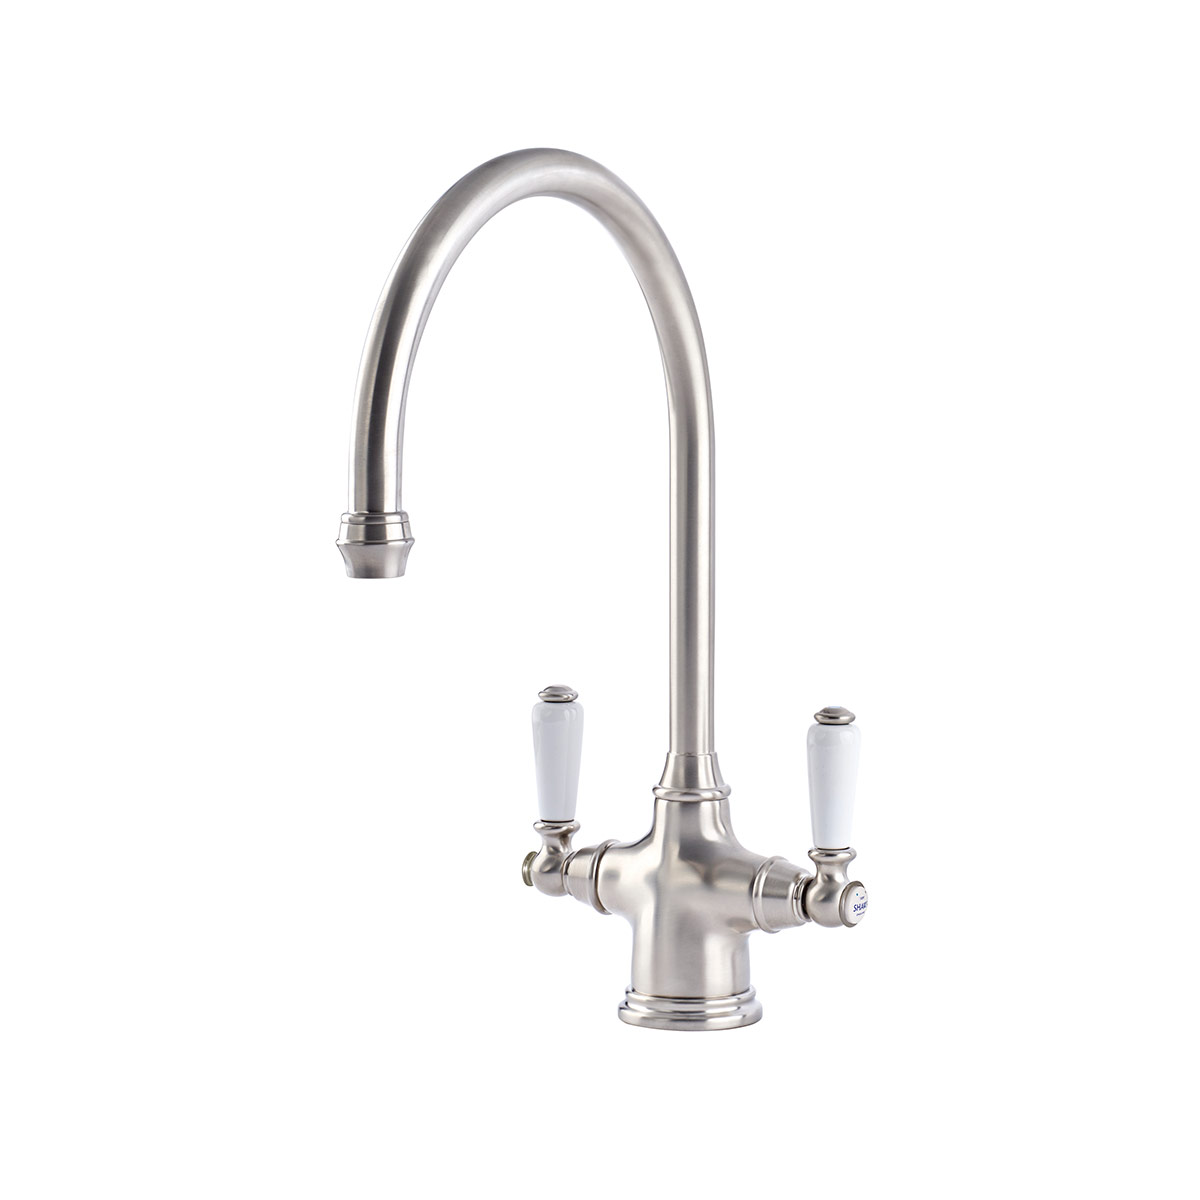 Shaws by Perrin & Rowe Ribble kitchen mixer in Pewter. Phoenician style monobloc kitchen tap AUSH.4460. Distributed in Australia by Luxe by Design, Brisbane.